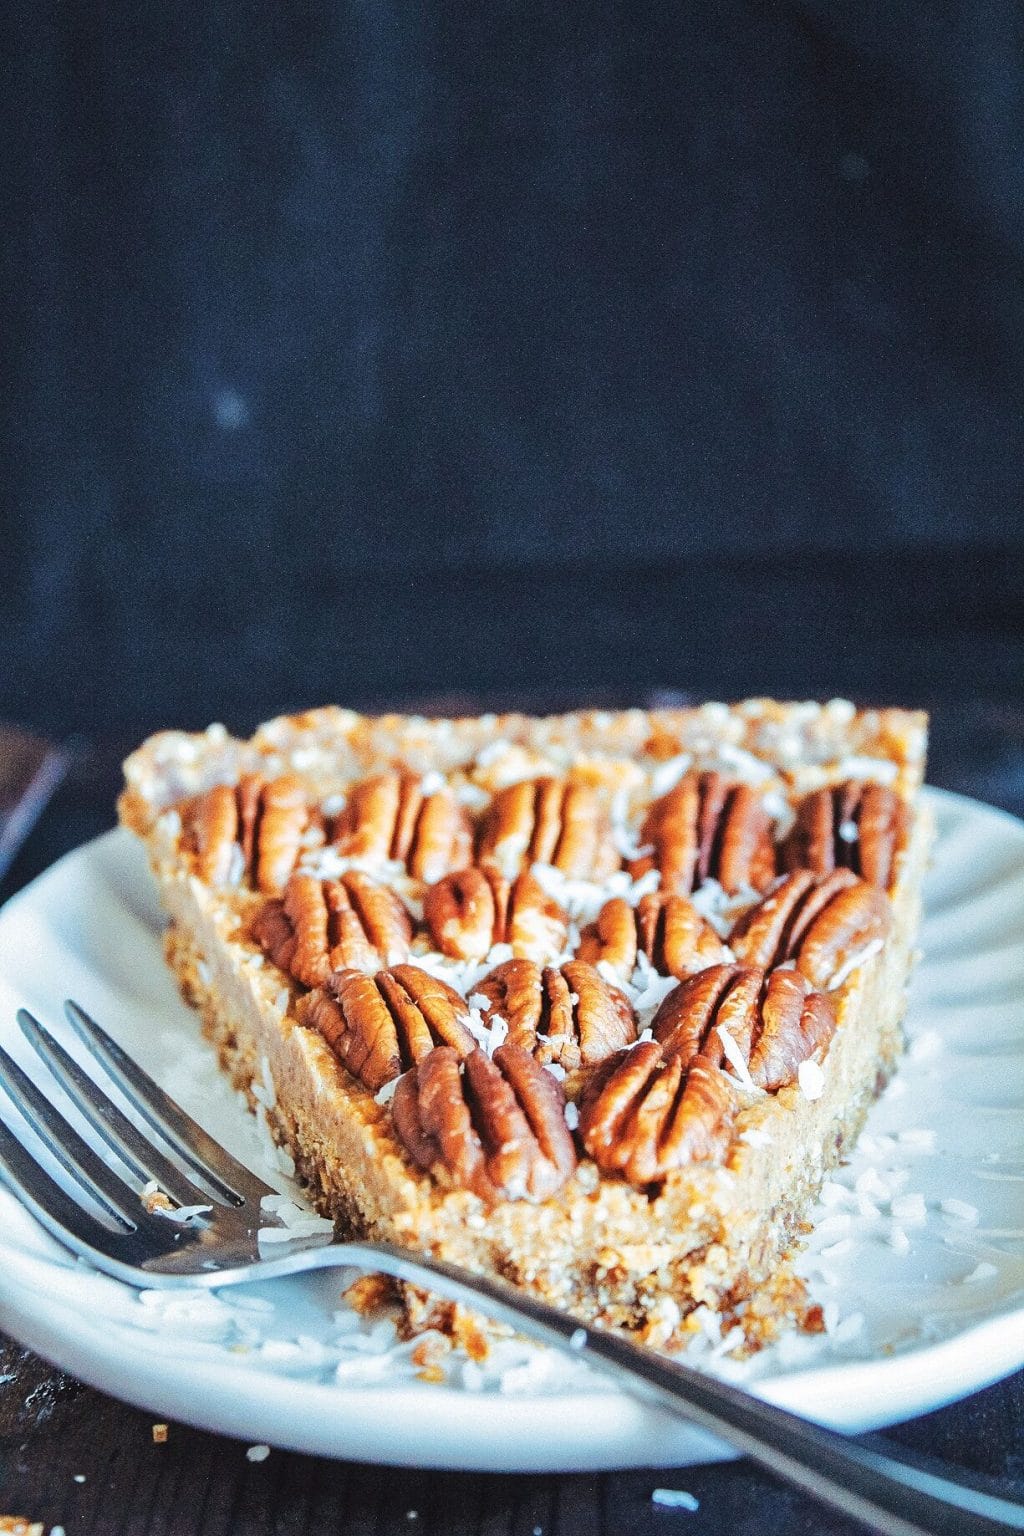 A slice of maple pecan pie on a white plate with a silver fork resting on the edge of the plate